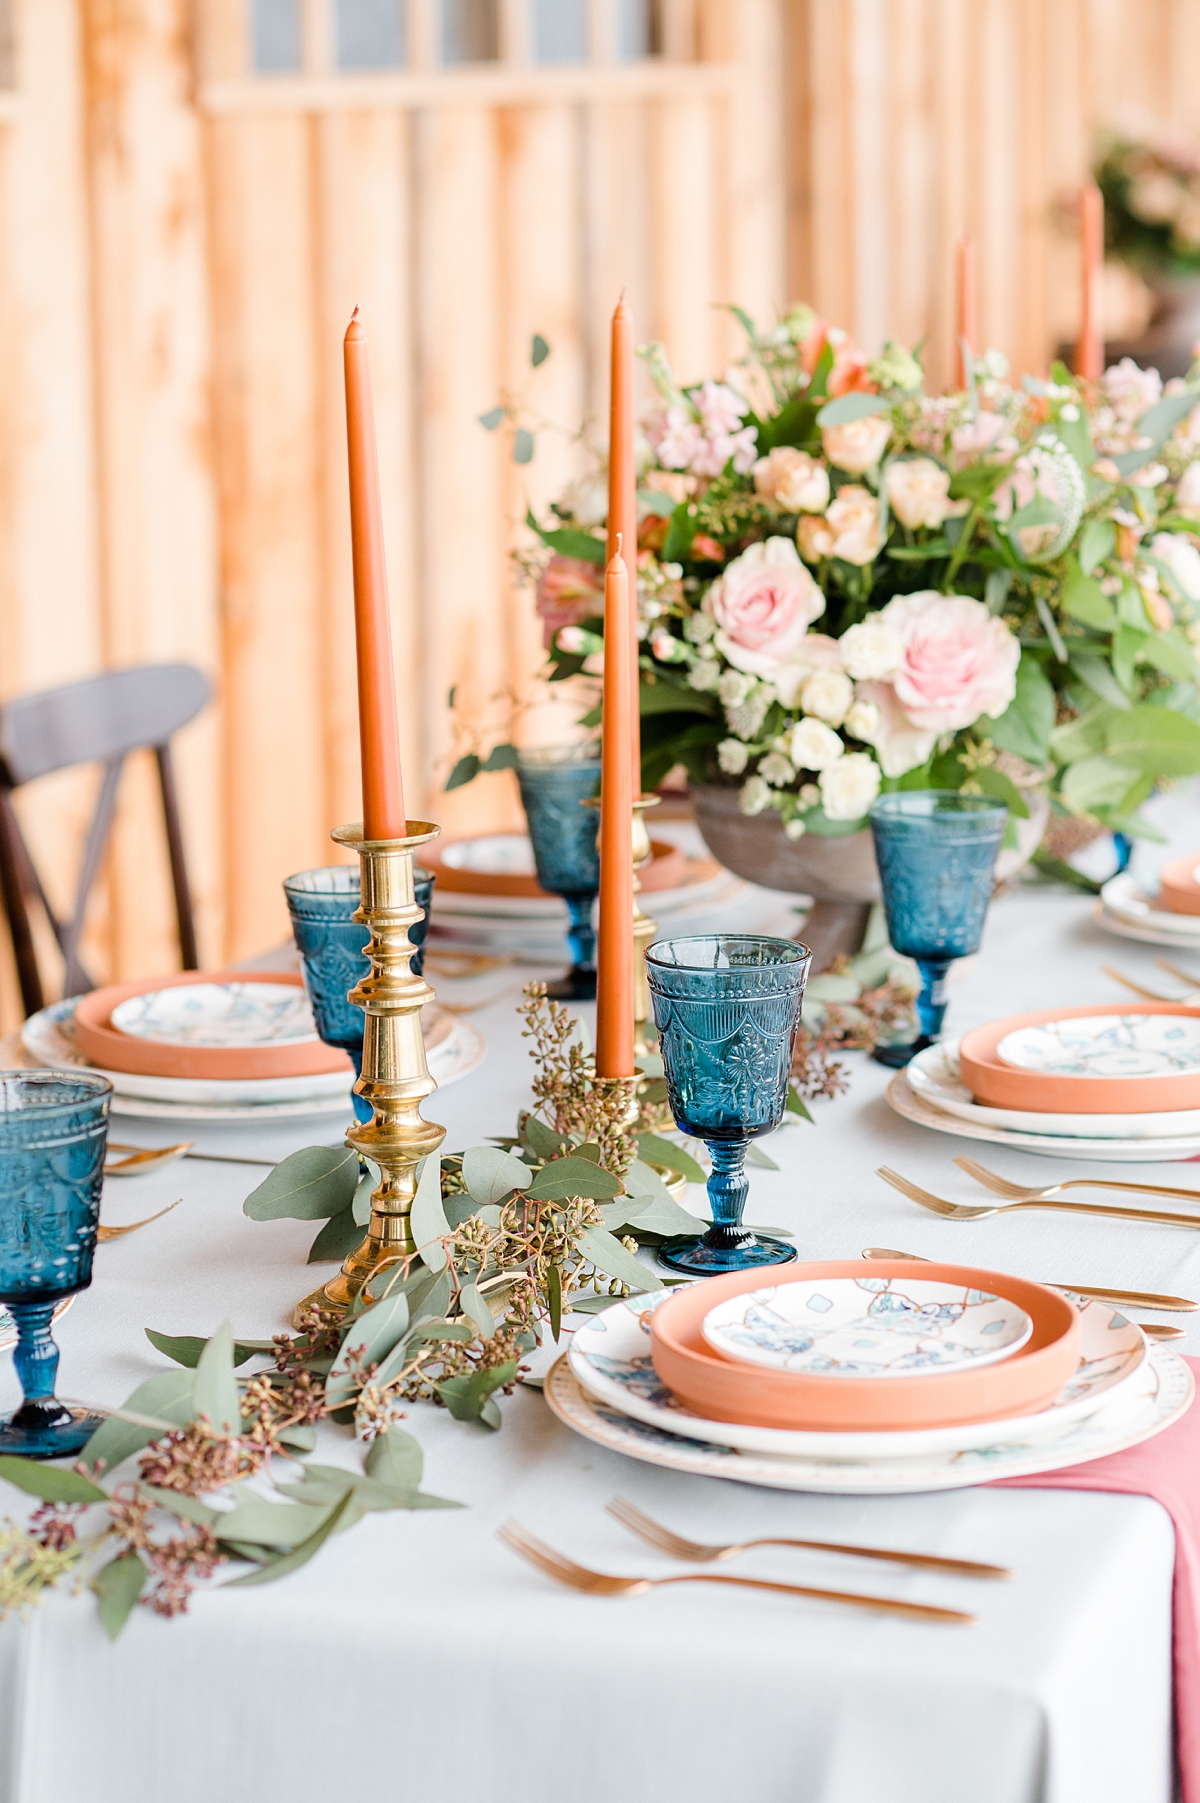 Reception Decor with Bold Colors at East View Farms Wedding Styled Shoot by Heather Lea Events and Virginia Wedding Photographer Kailey Brianne Photography. 